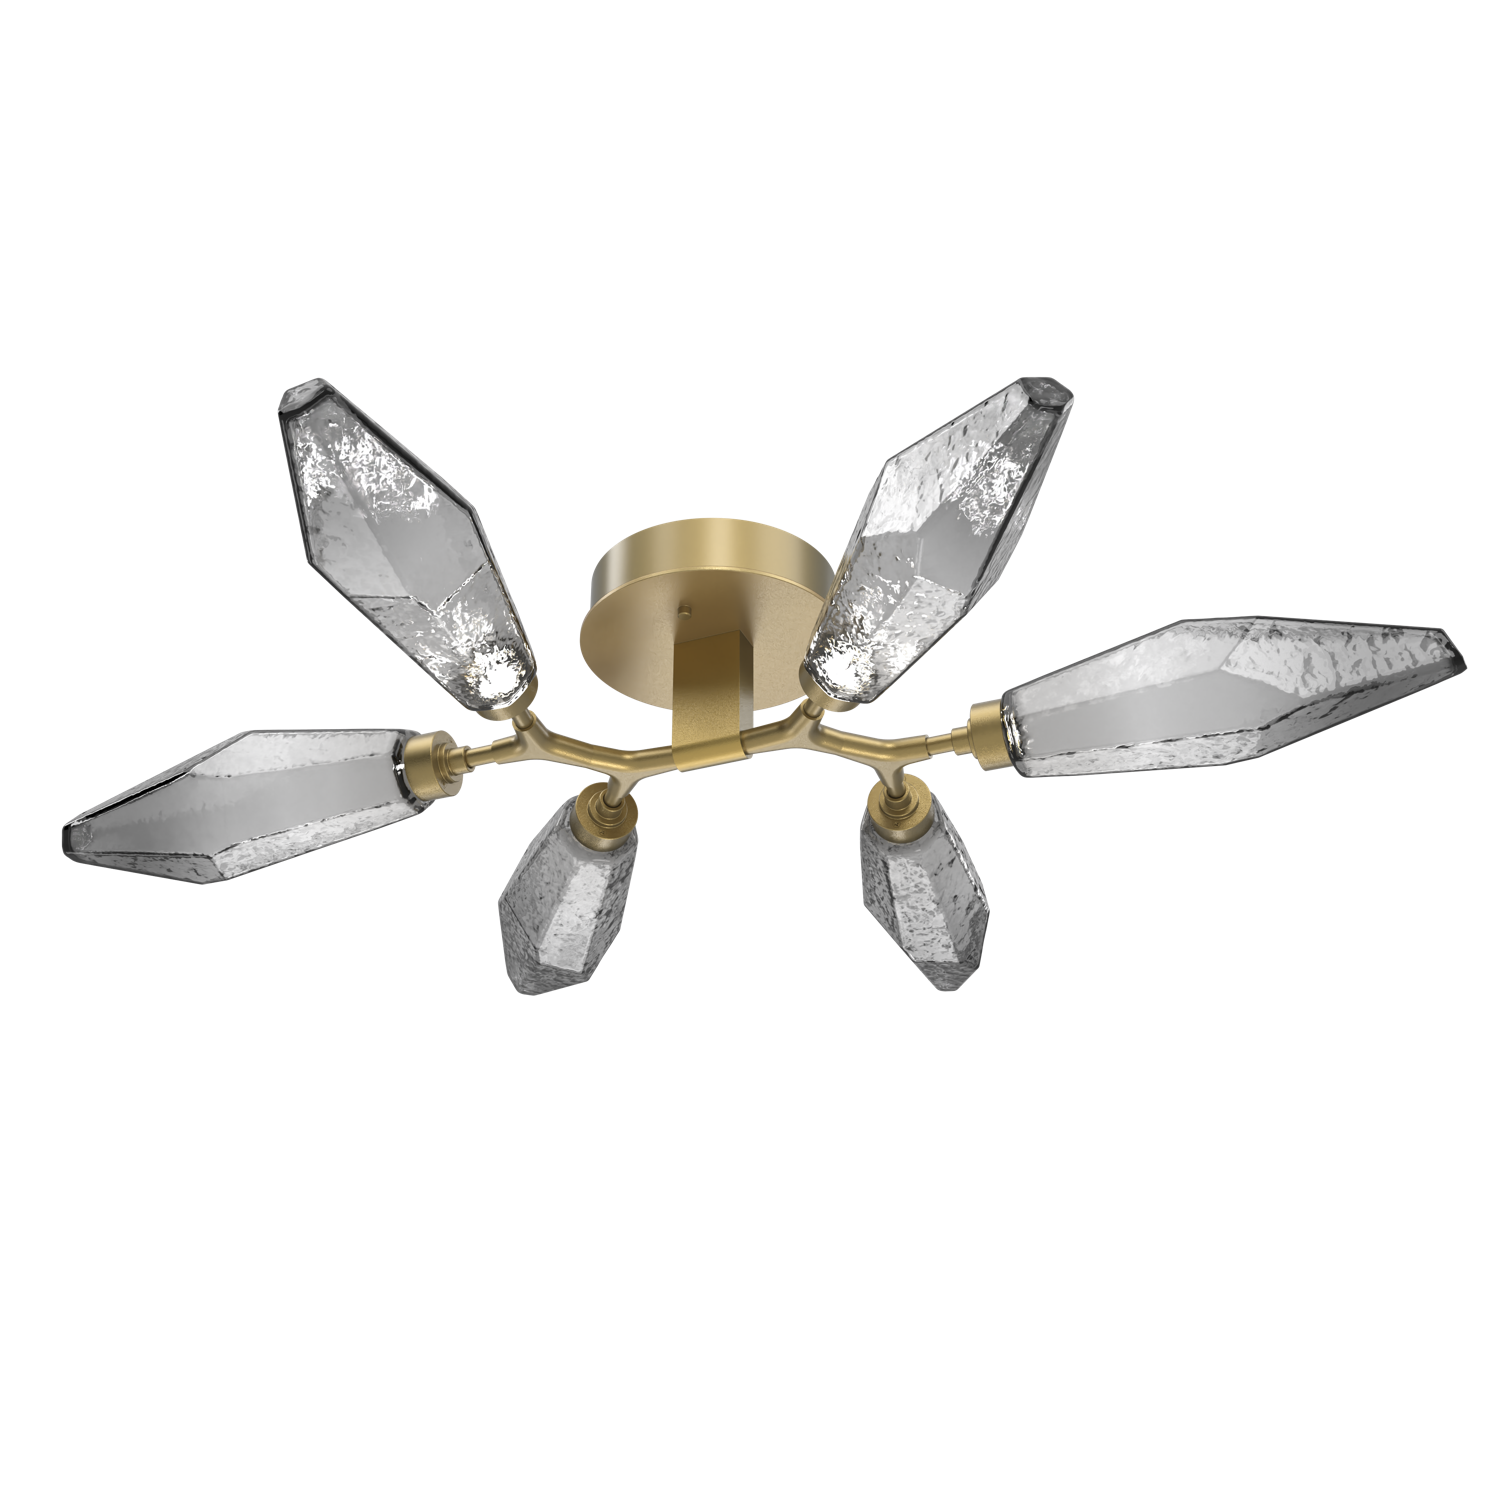 CLB0050-01-GB-CS-Hammerton-Studio-Rock-Crystal-flush-mount-light-with-gilded-brass-finish-and-chilled-smoke-glass-shades-and-LED-lamping